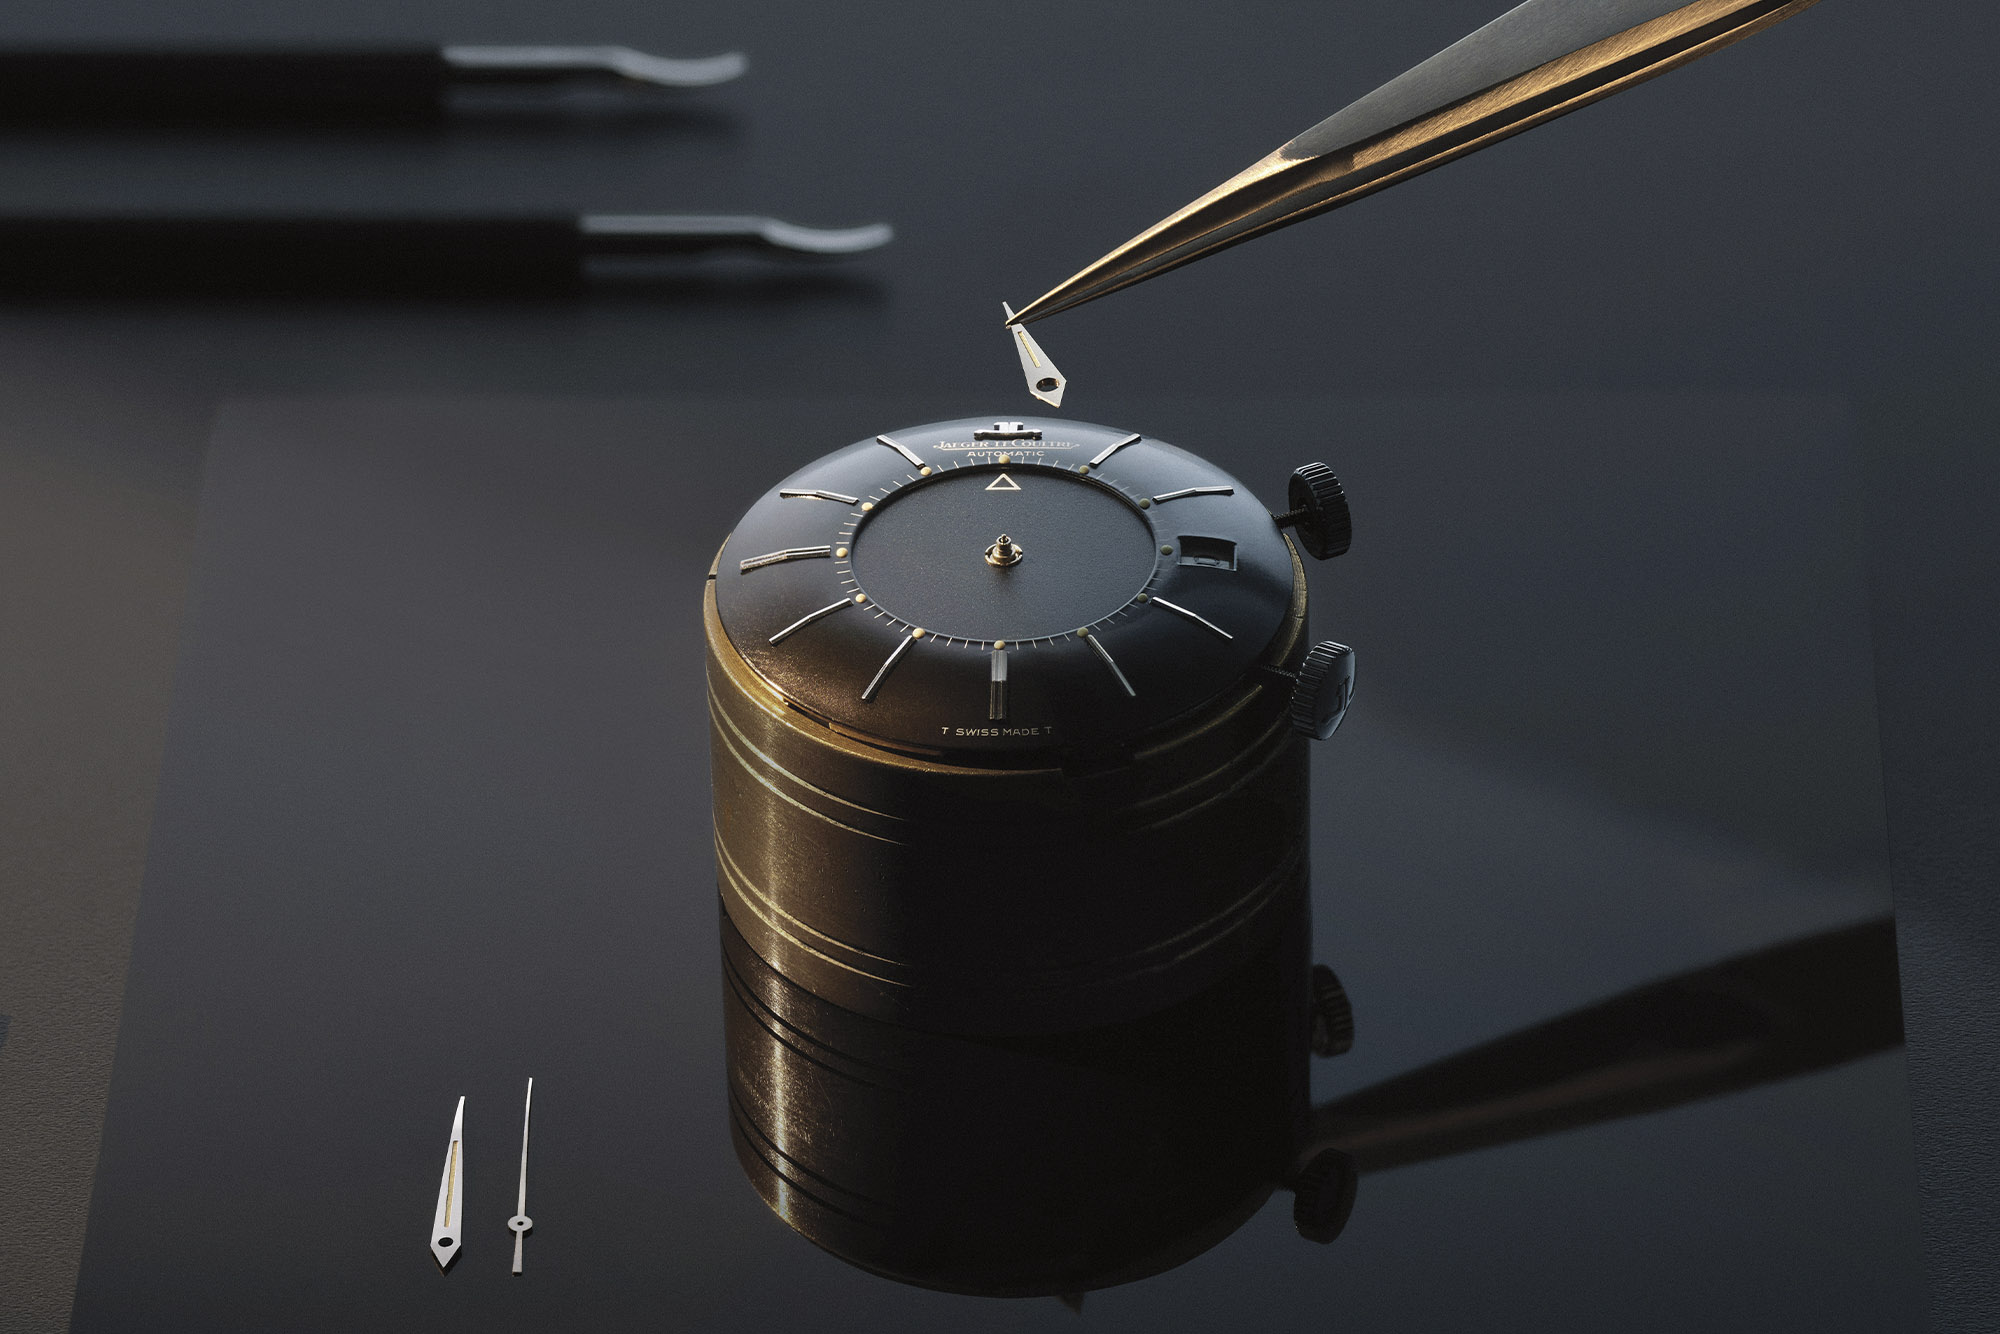 Jaeger-LeCoultre watchmaking process